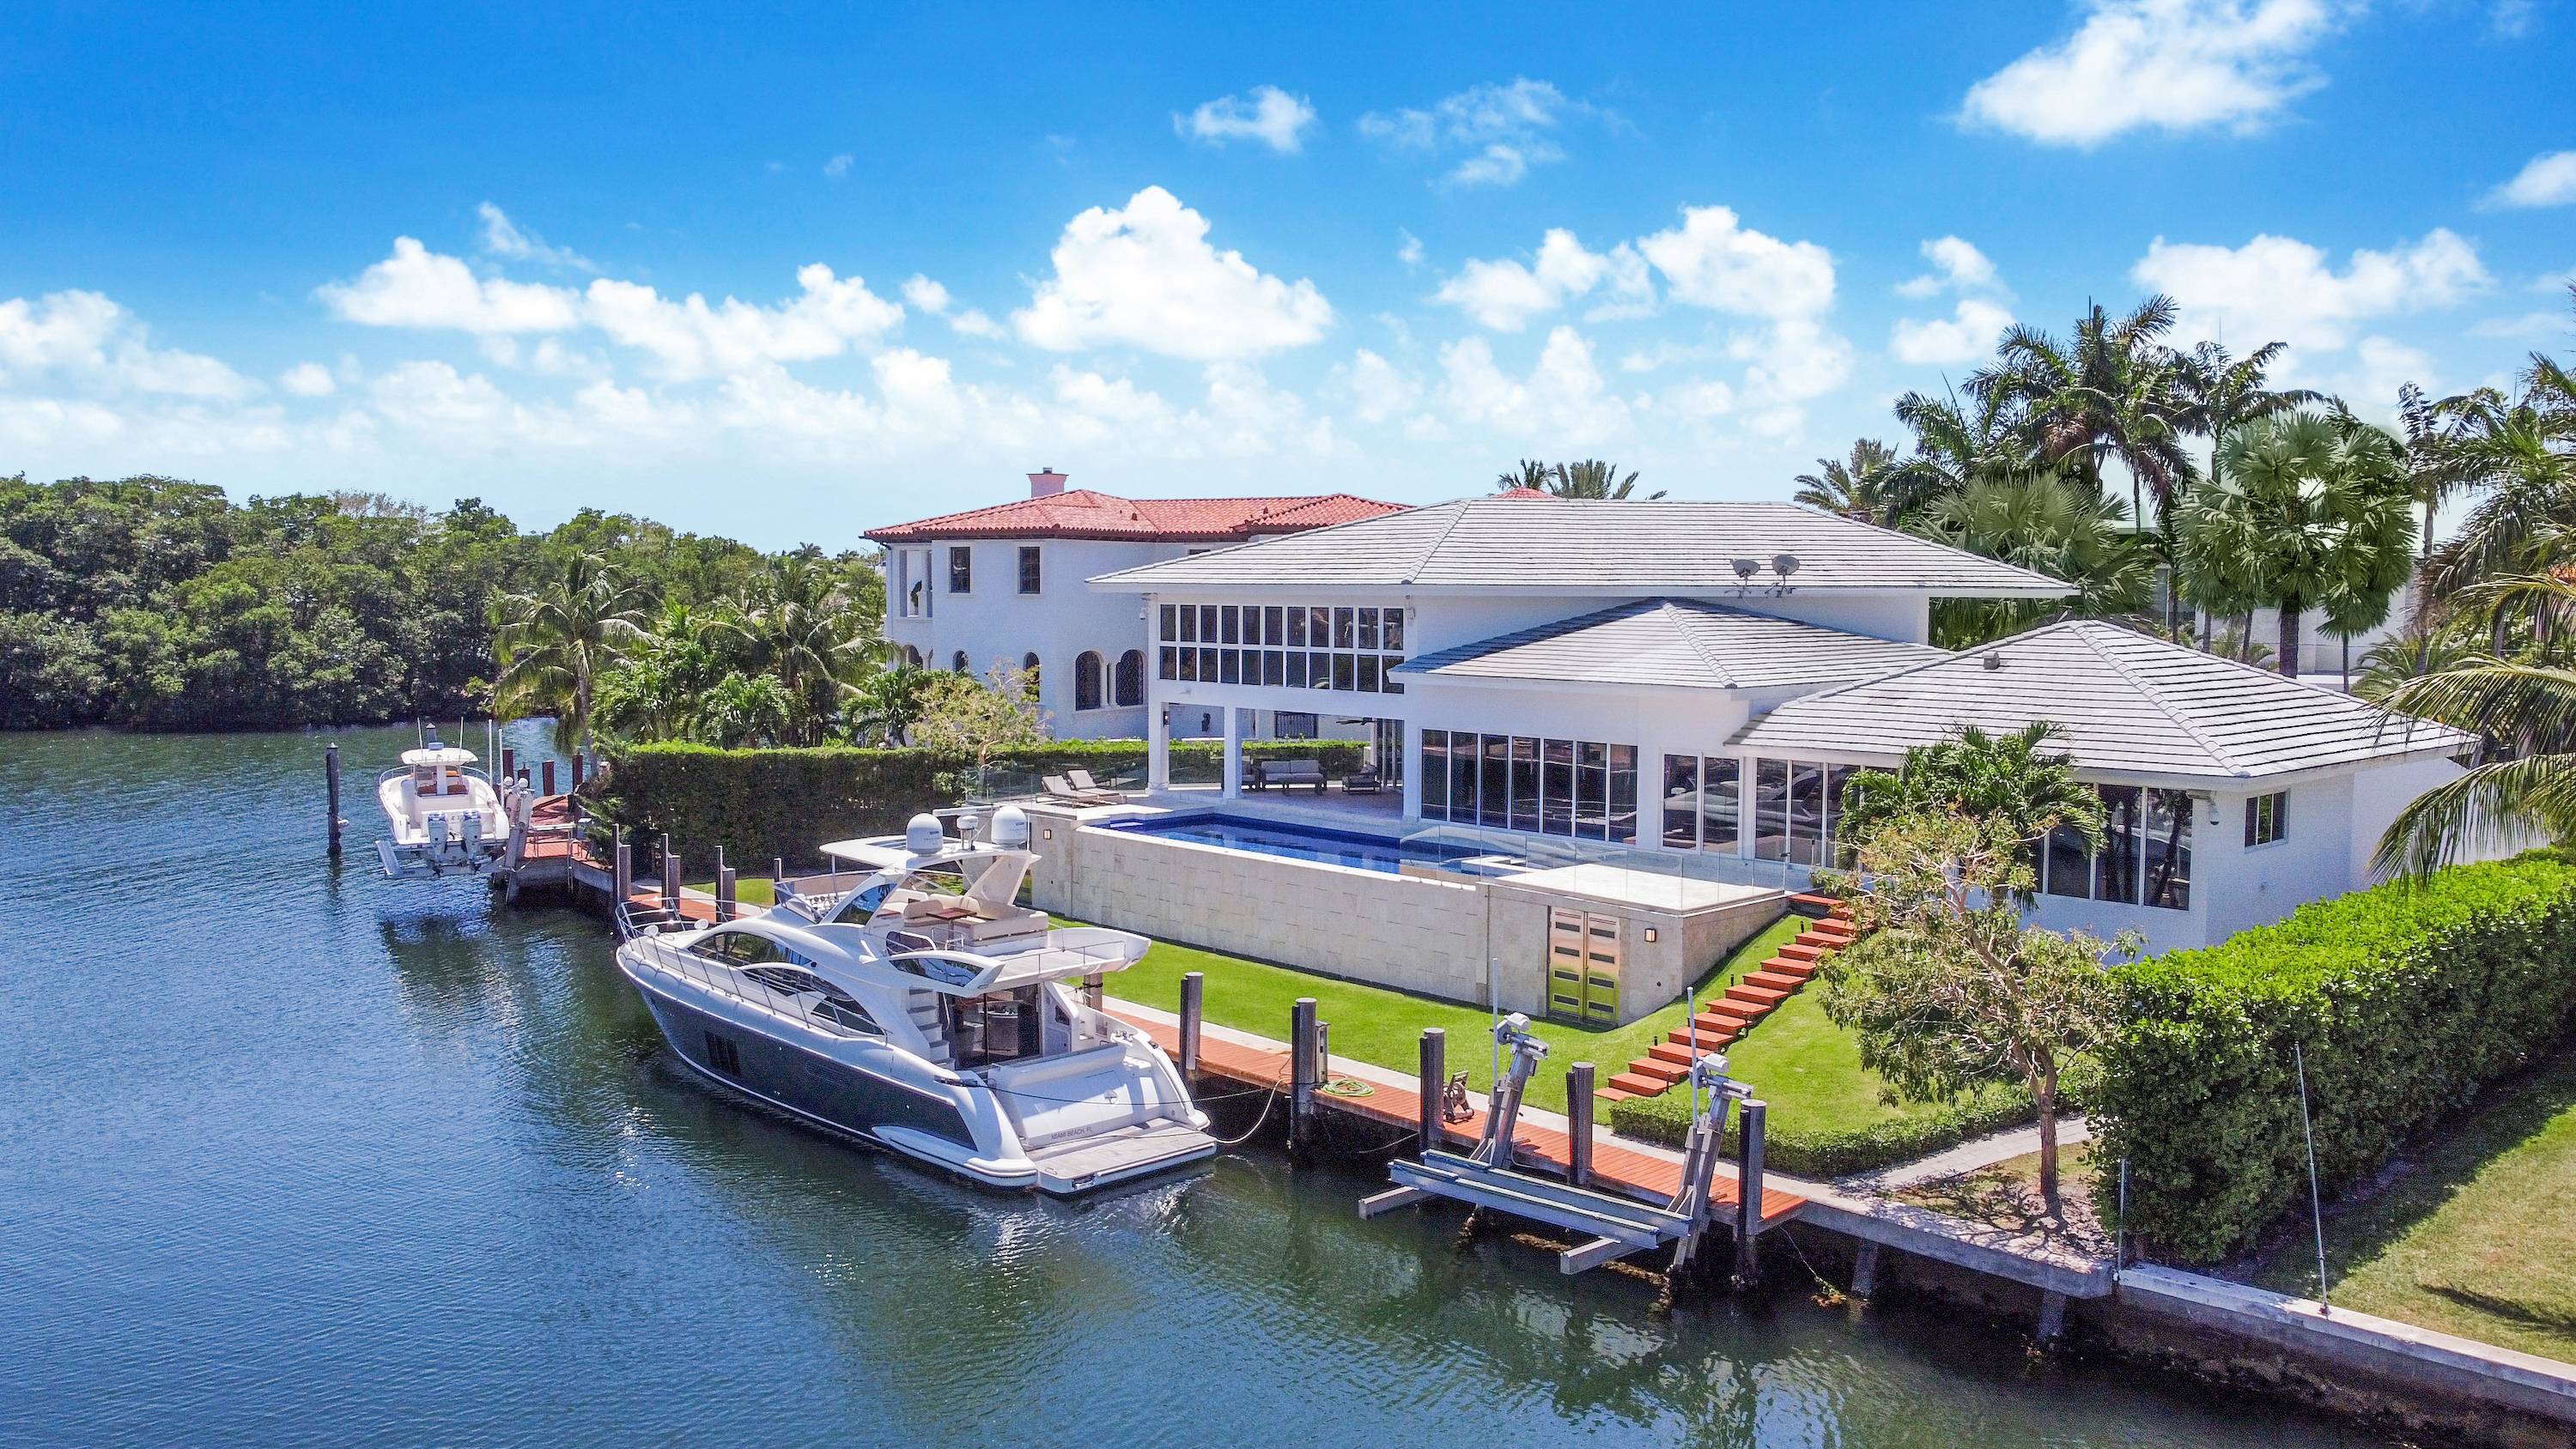 MIAMI'S Gated Neighborhood Mansion | 5 bed 5 bath 3 Car Garage Pool Boat Dock | A total of 8,763 sf | PRICE TO SELL!!